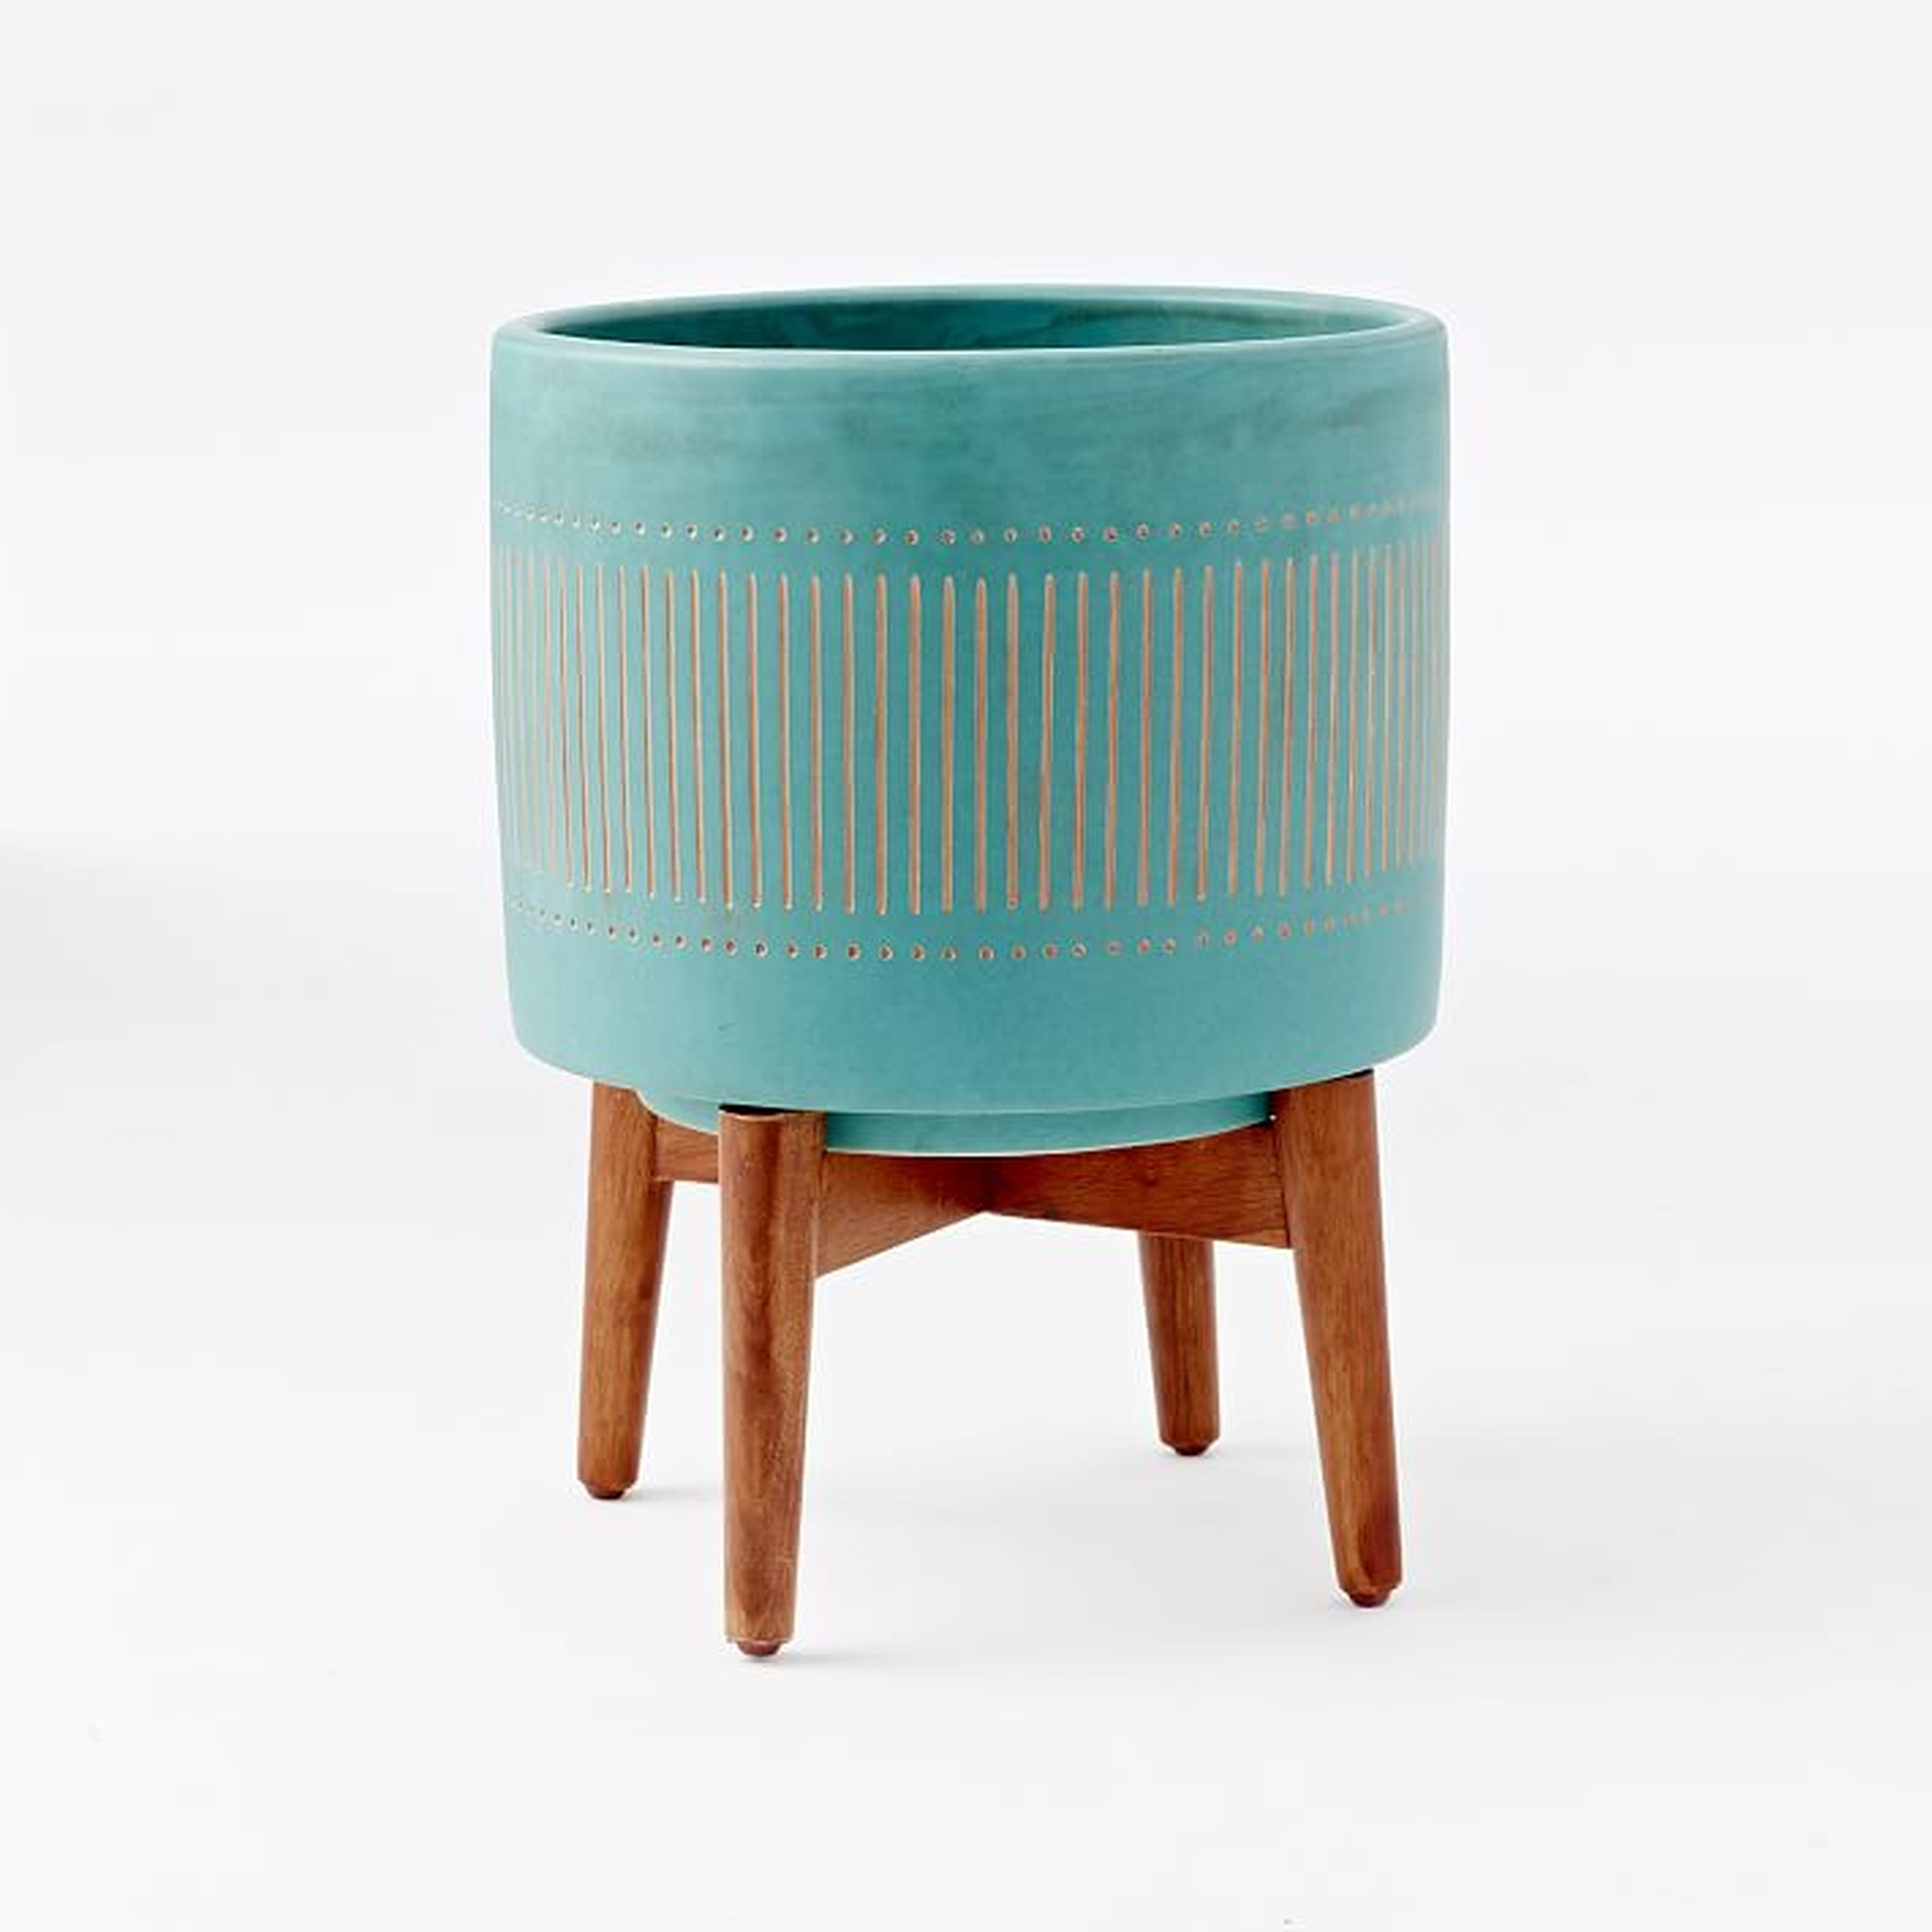 Turned Wood Leg Standing Planter, Wide, Turquoise - West Elm